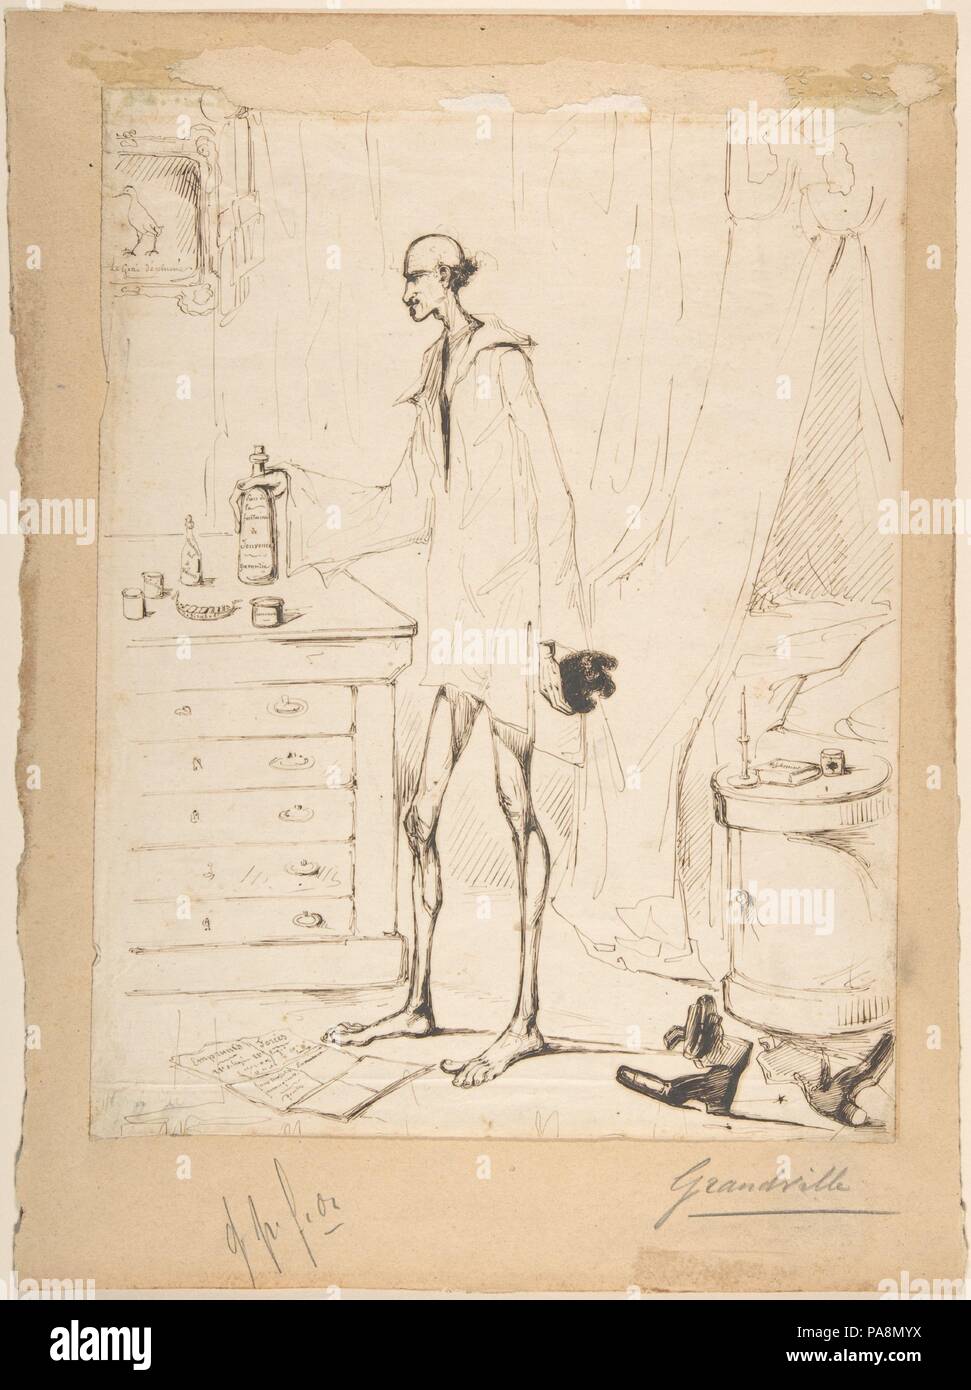 Man in a Nightshirt Reaching for a Bottle Labeled 'Fountain of Youth'. Artist: J. J. Grandville (French, Nancy 1803-1847 Vanves). Dimensions: sheet: 11 7/8 x 9 3/16 in. (30.2 x 23.4 cm)  mount: 14 1/2 x 10 11/16 in. (36.8 x 27.2 cm). Date: 1803-47. Museum: Metropolitan Museum of Art, New York, USA. Stock Photo